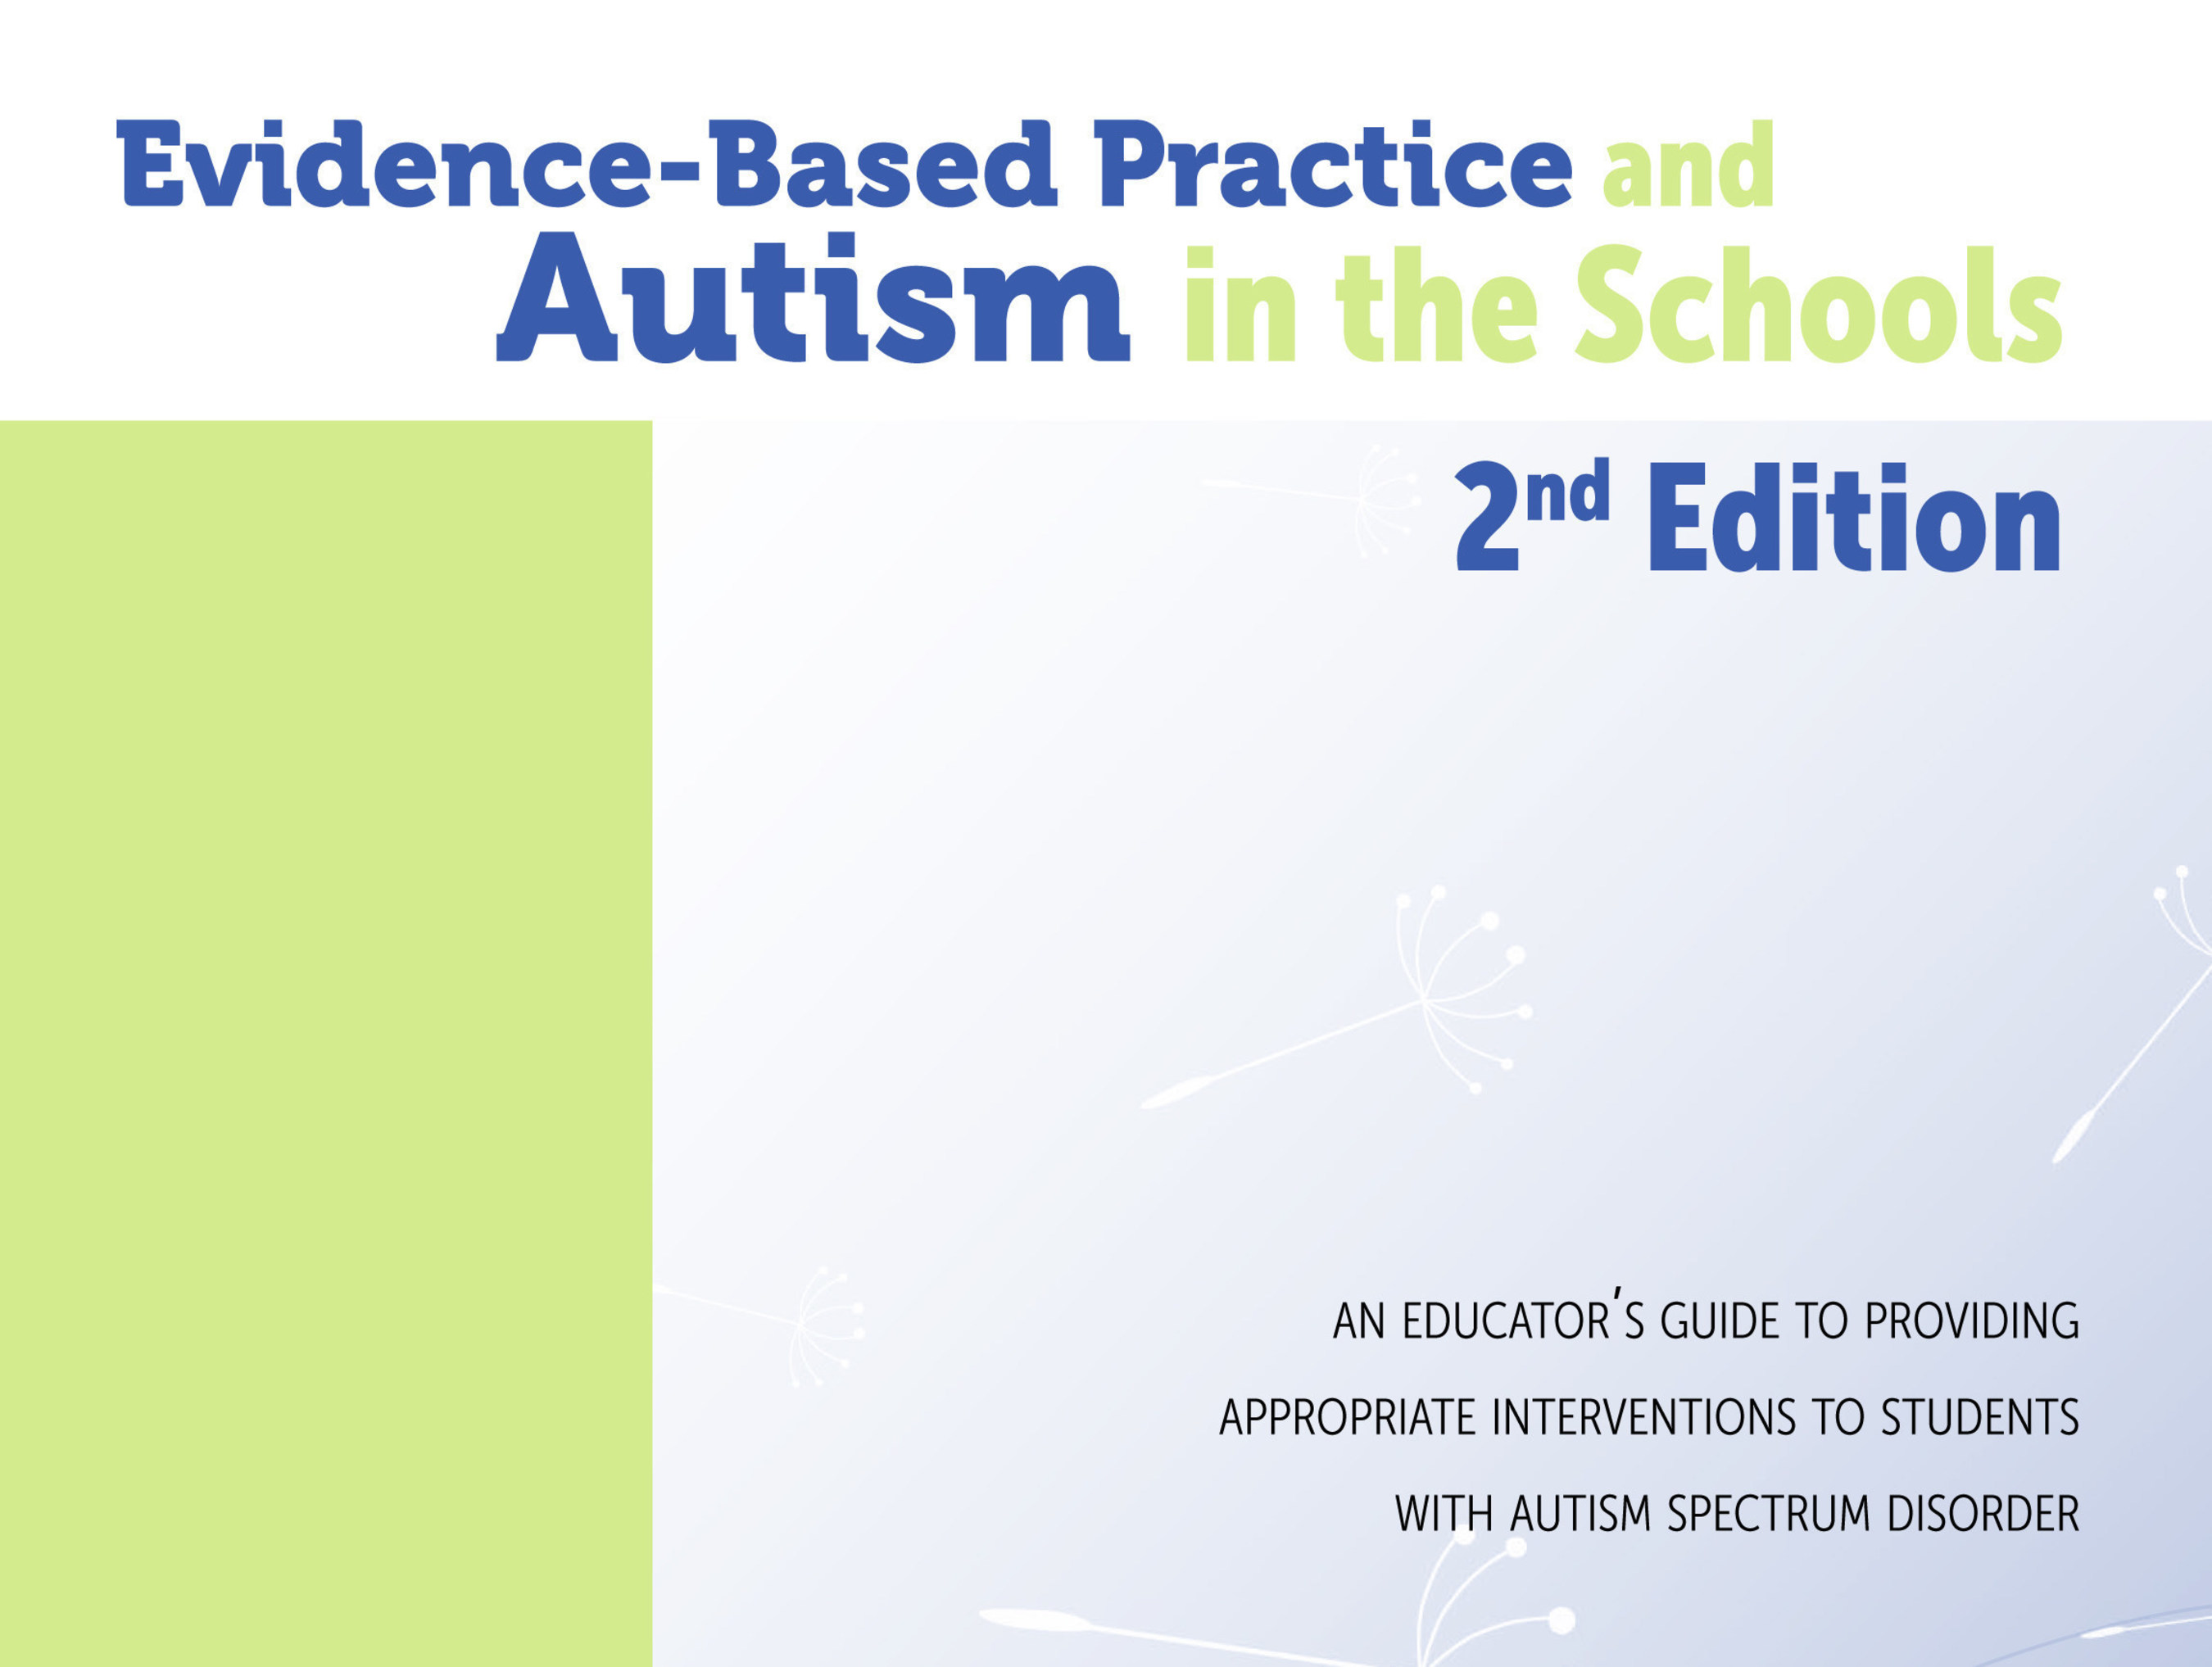 This manual on autism is available as a free download at www.nationalautismcenter.org.